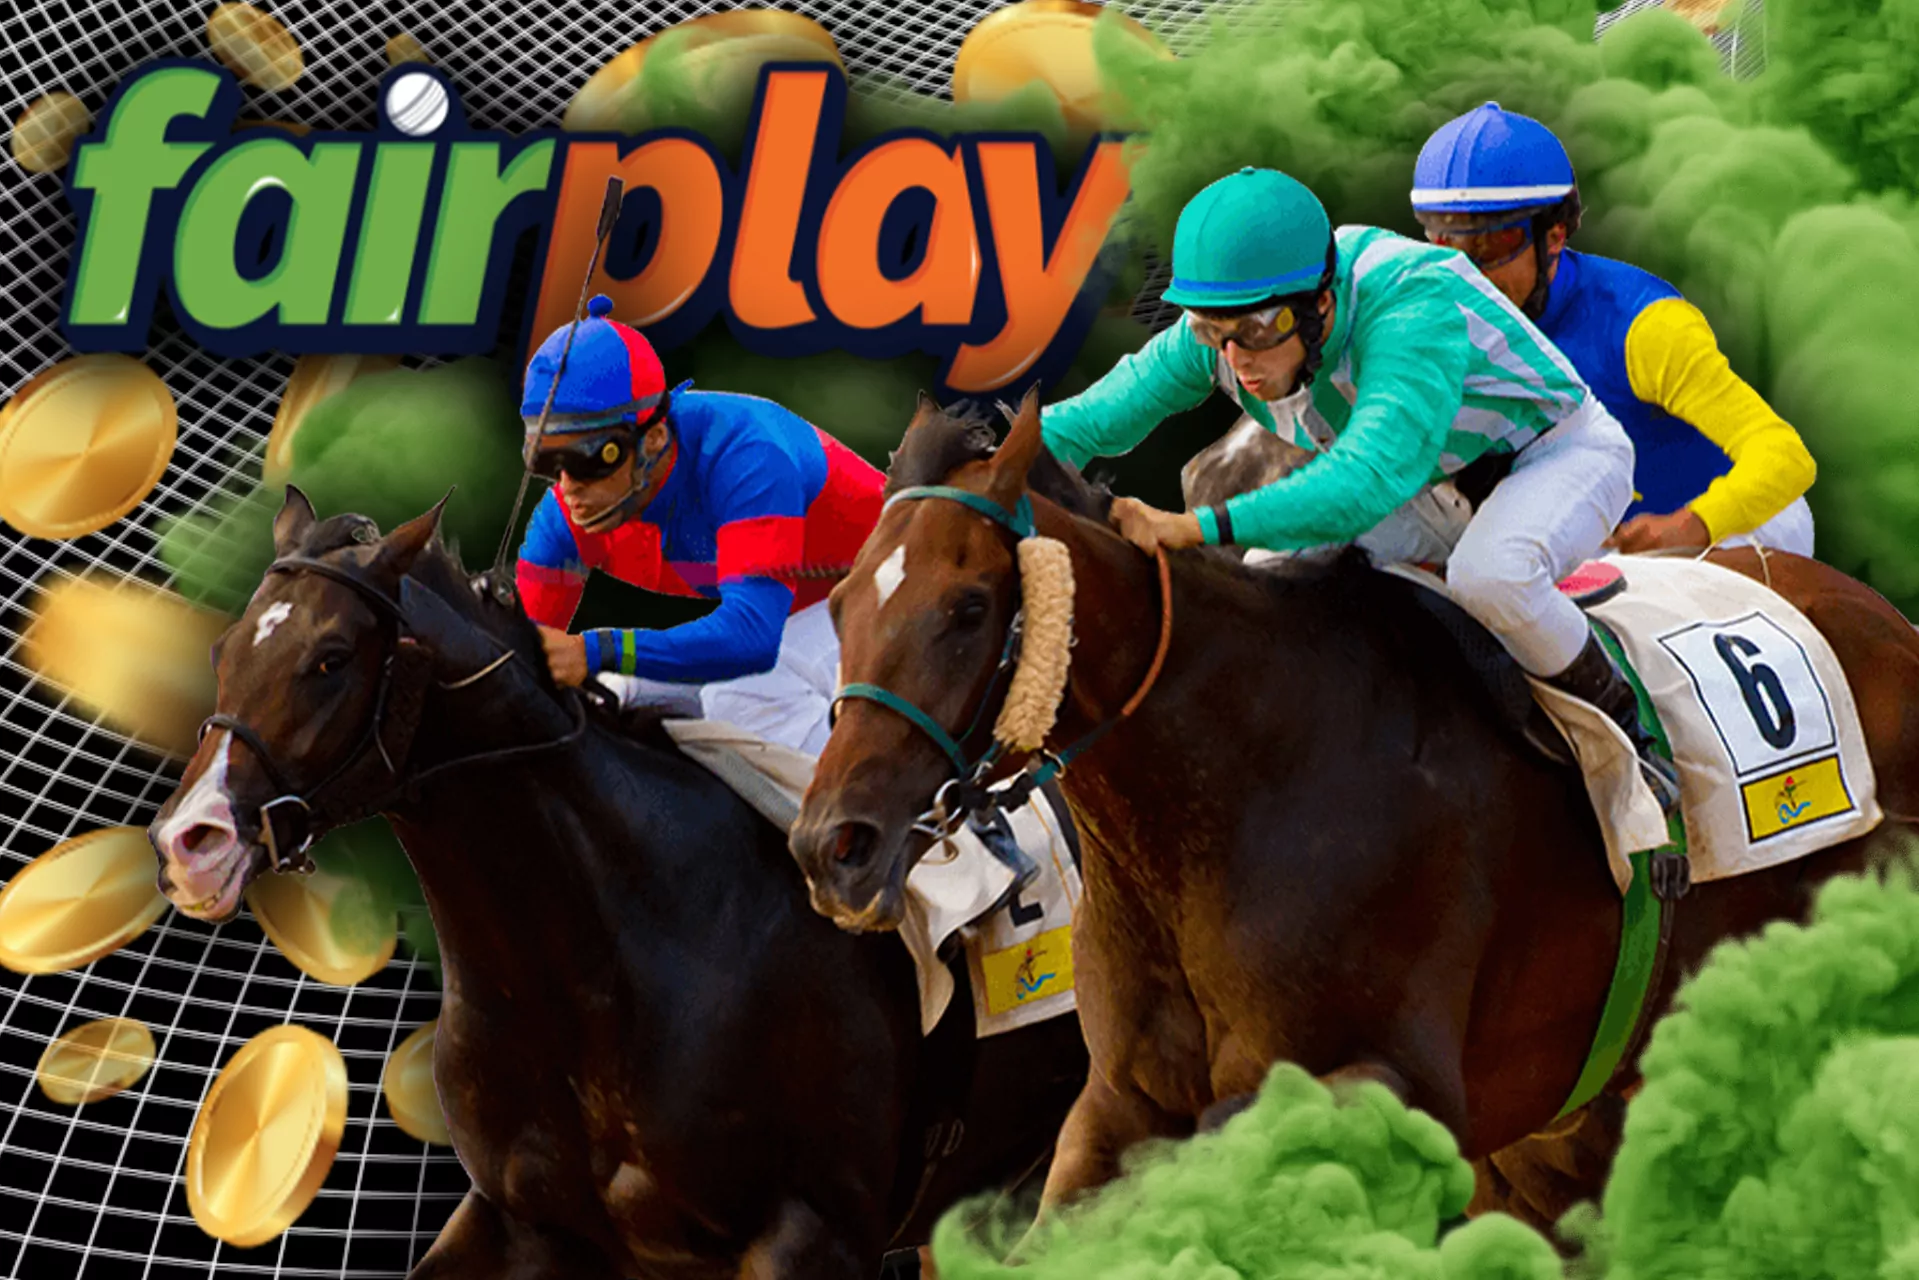 Start betting on horse races at Fairplay.